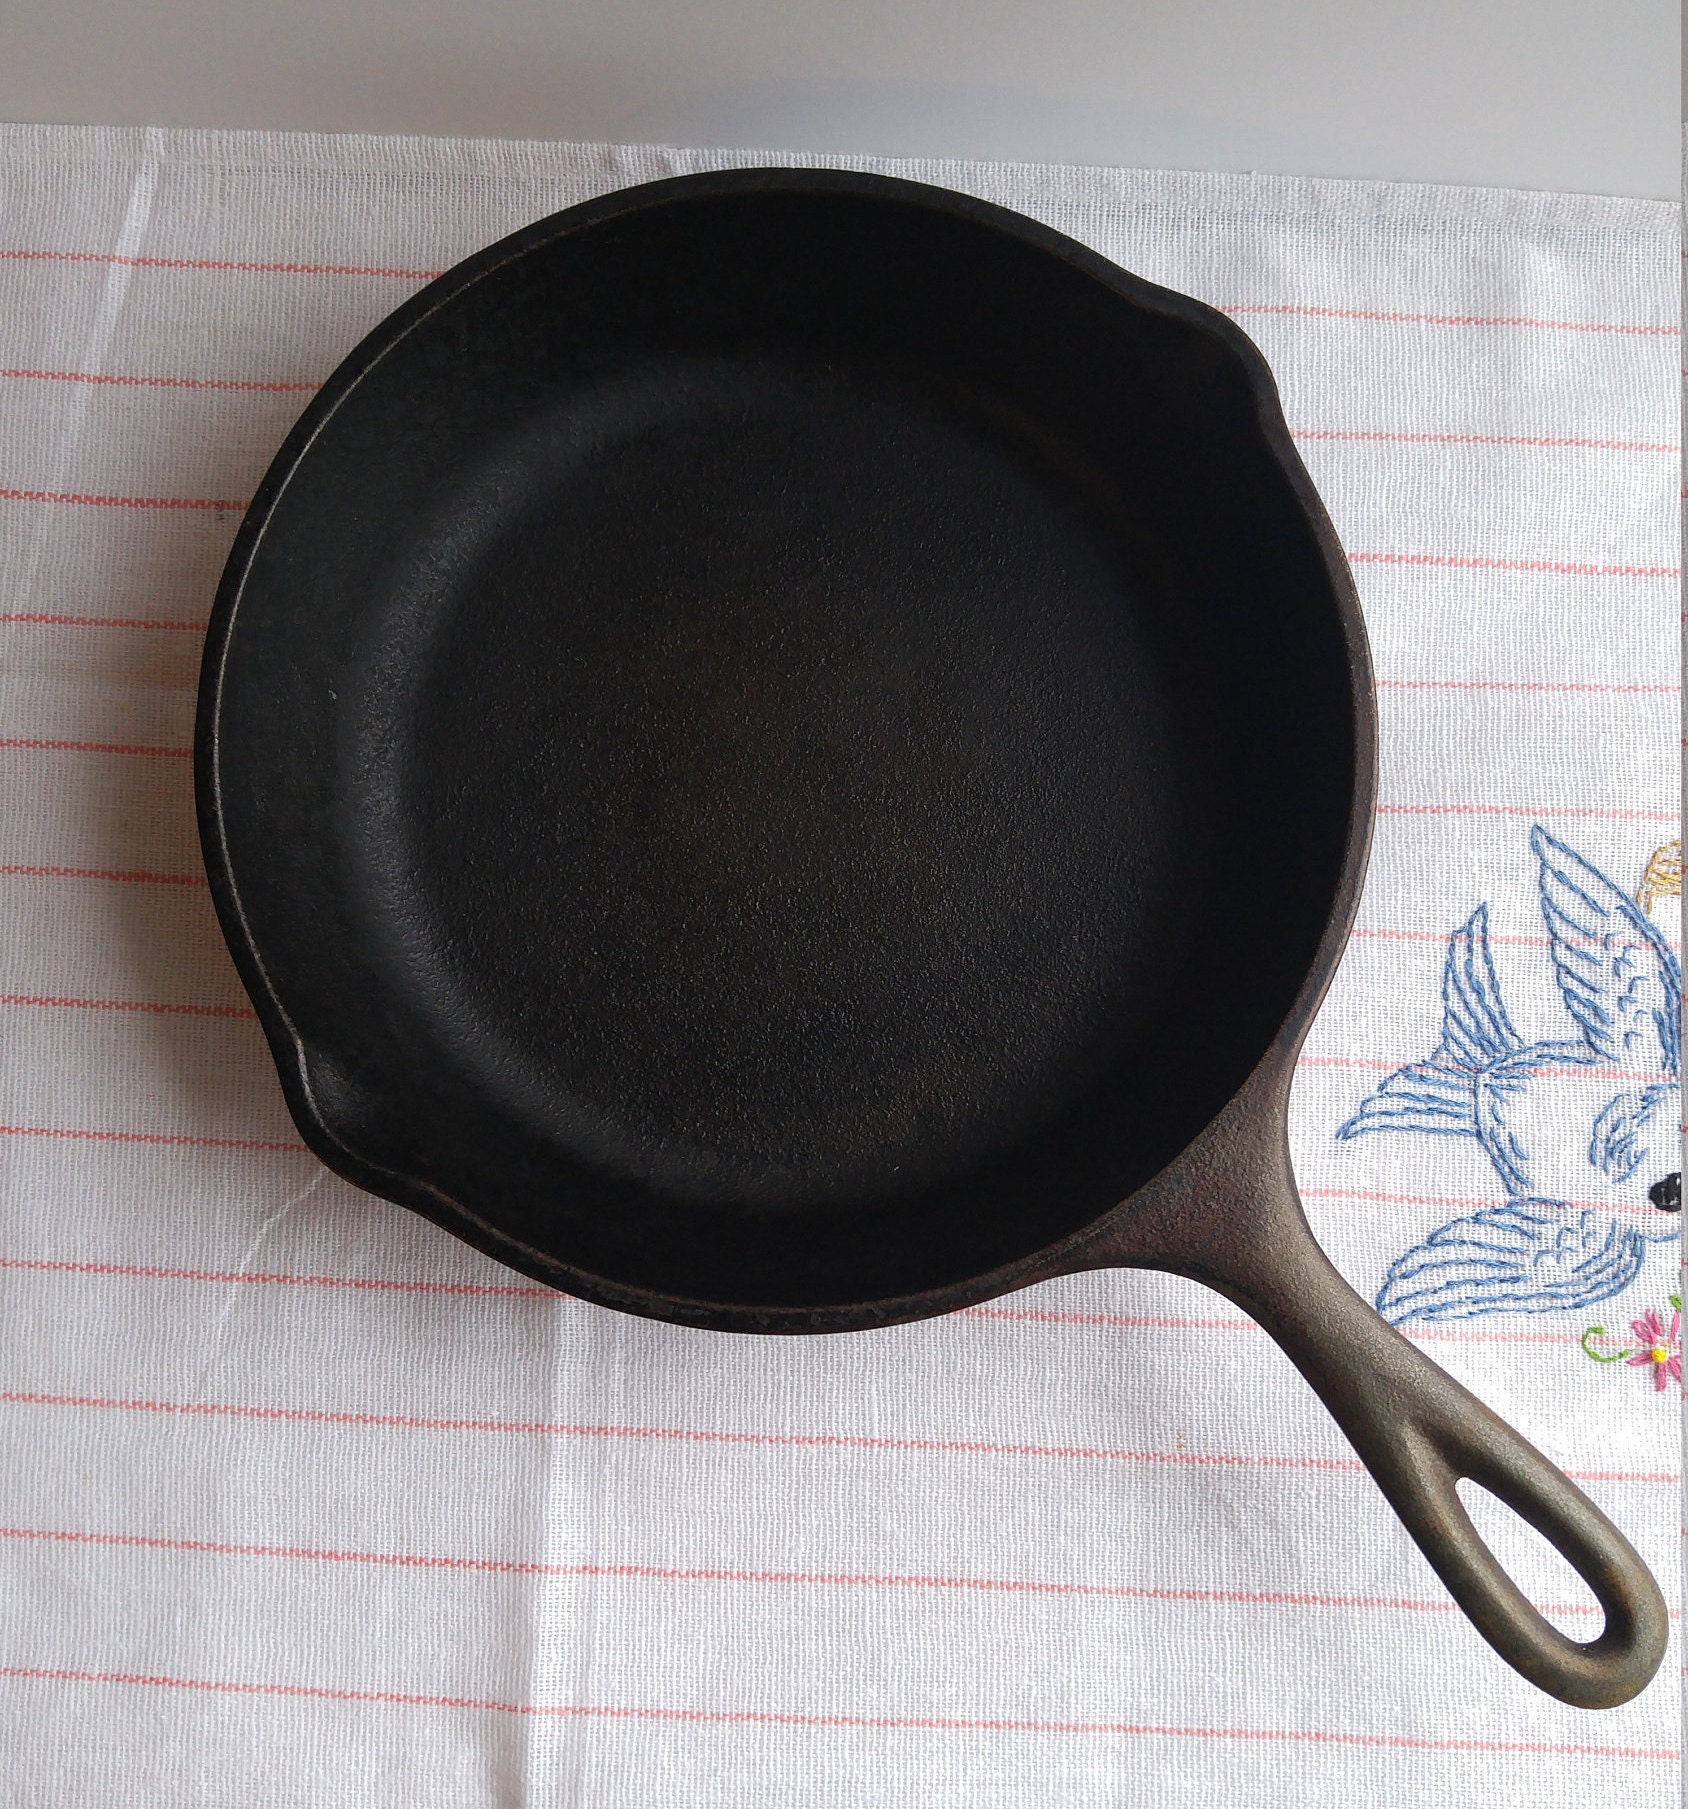 VINTAGE LODGE #8 10 INCH CAST IRON SKILLET FRYING PAN P/N 8SK MADE IN USA